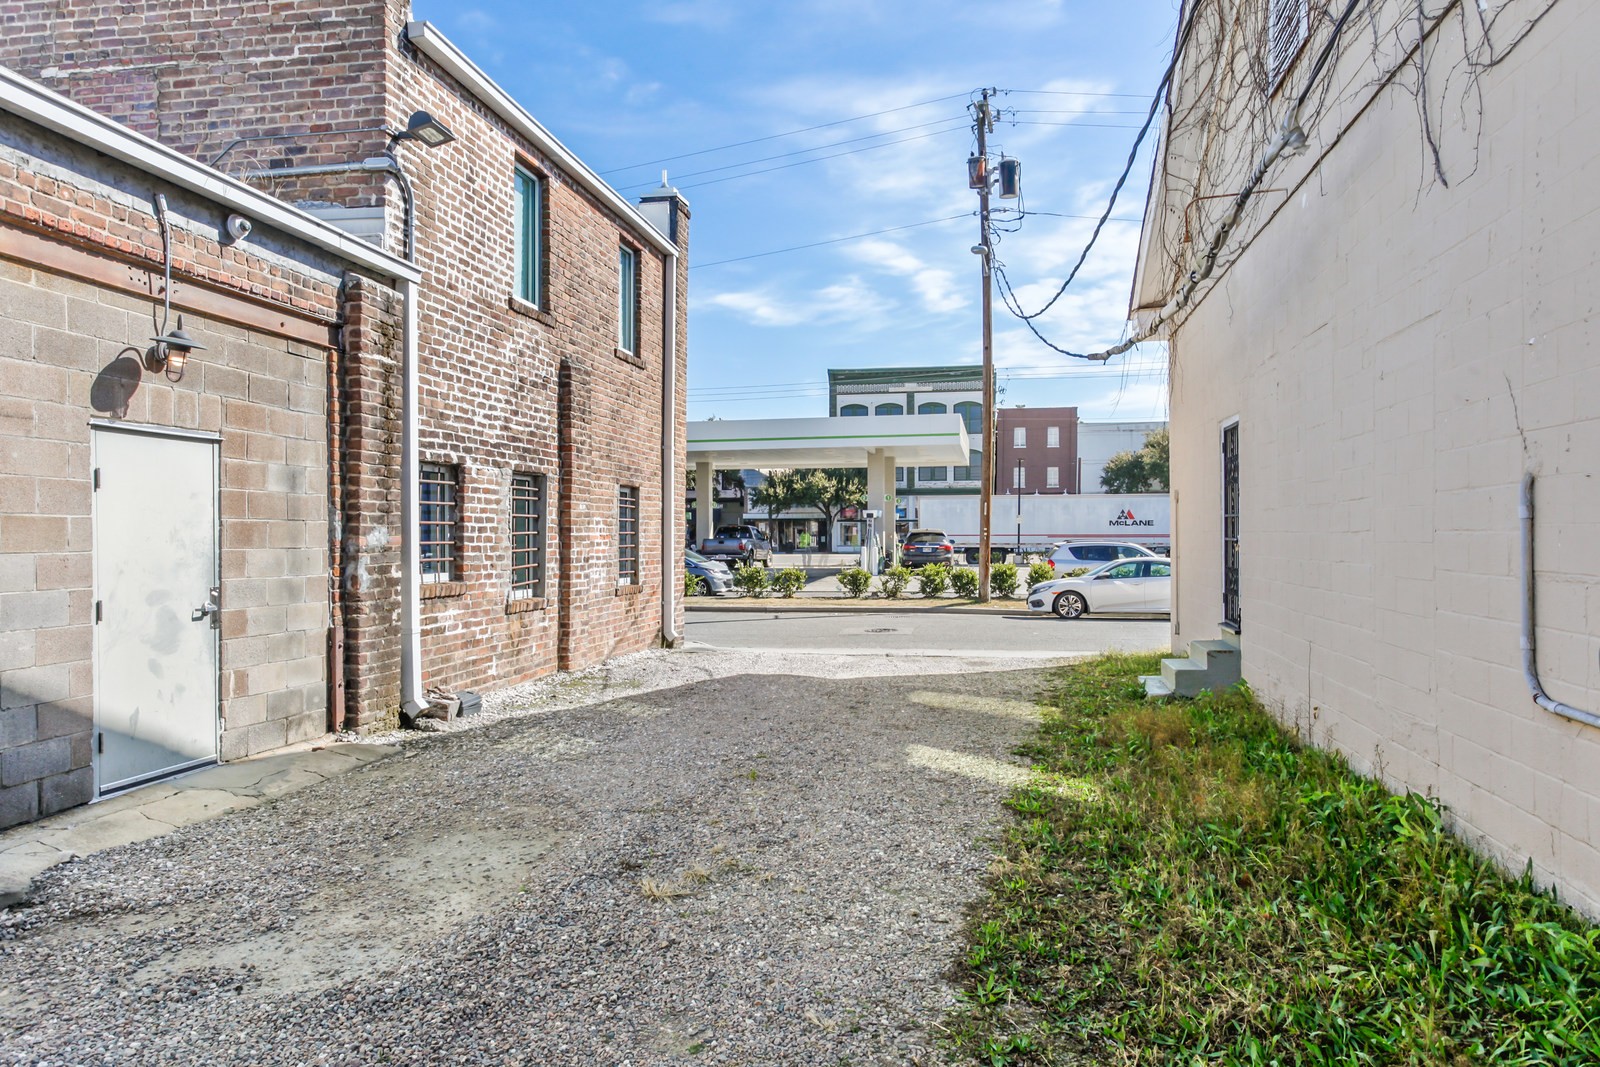 Abutting historic warehouses and commercial properties just west of MLK, and south of Historic Jones Street. 